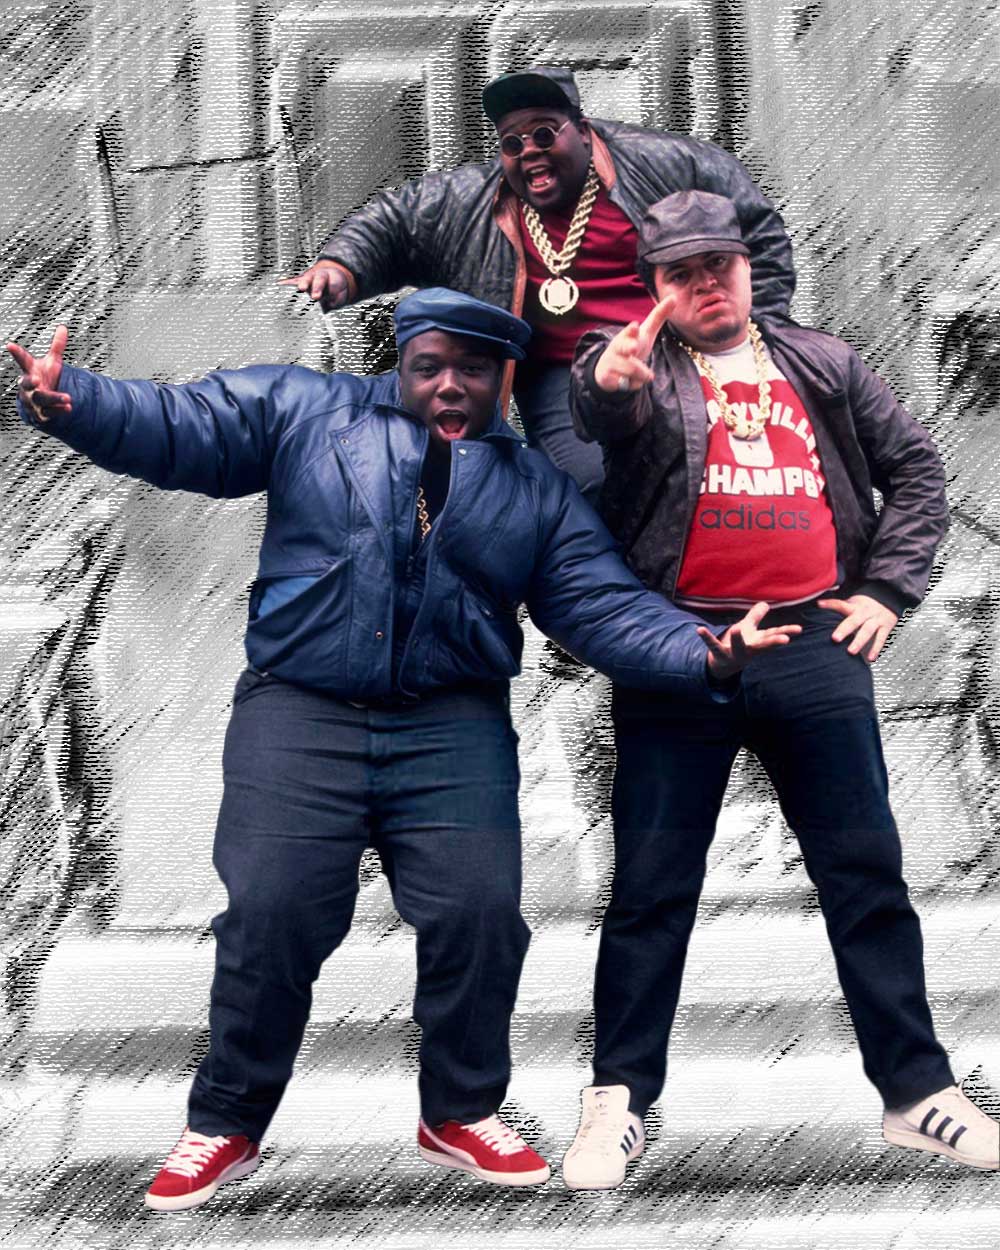 The Fat Boys late 80s hip hop fashion style